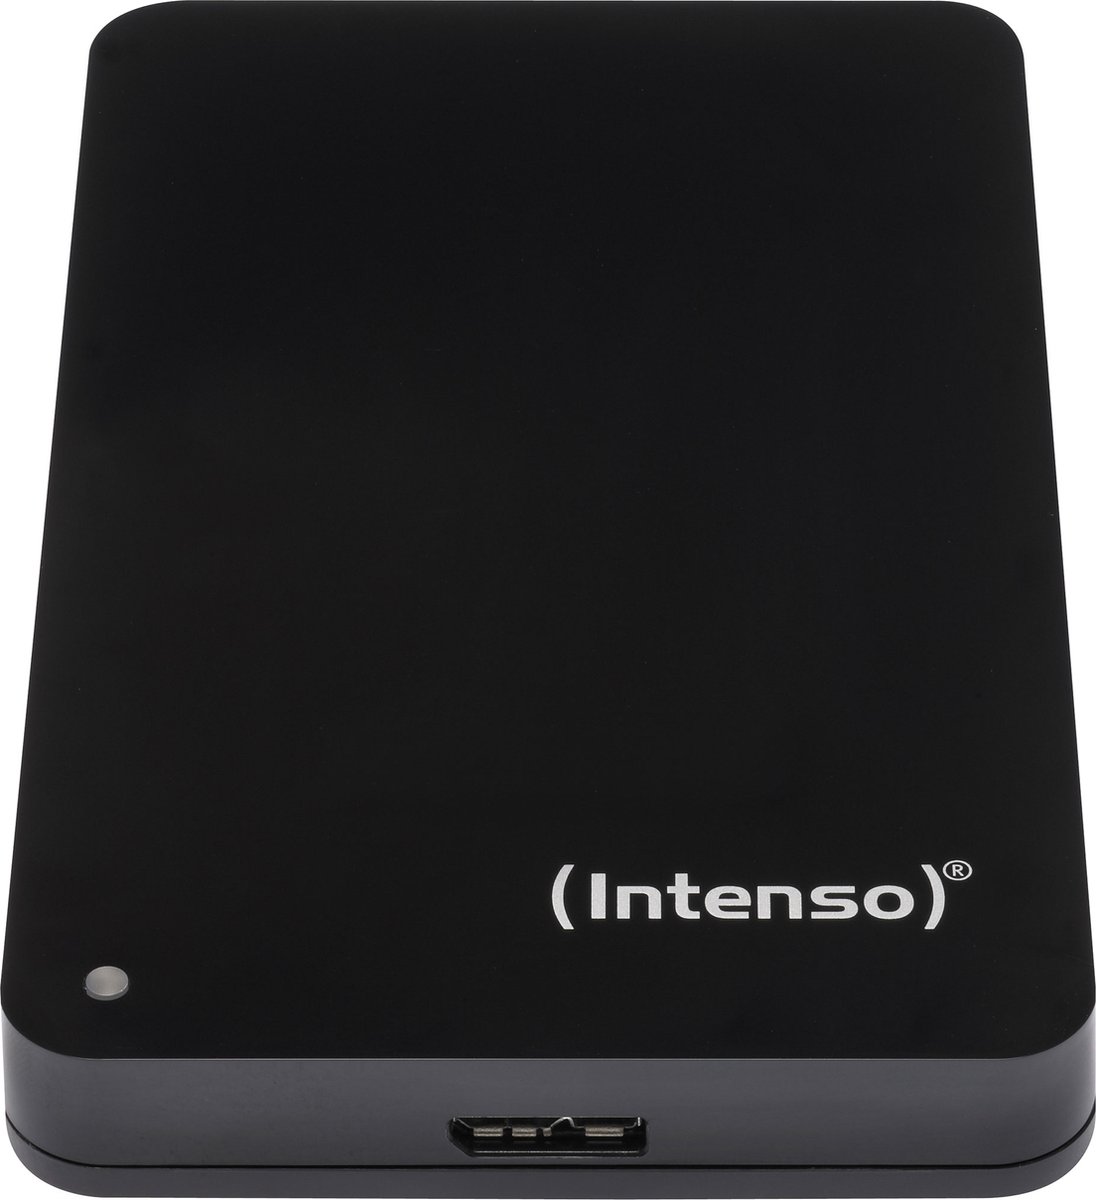 (Intenso) 2,5inch Memory Case 1 TB - Portable Externe HDD - 1TB - USB 3.2 Super Speed - Intenso